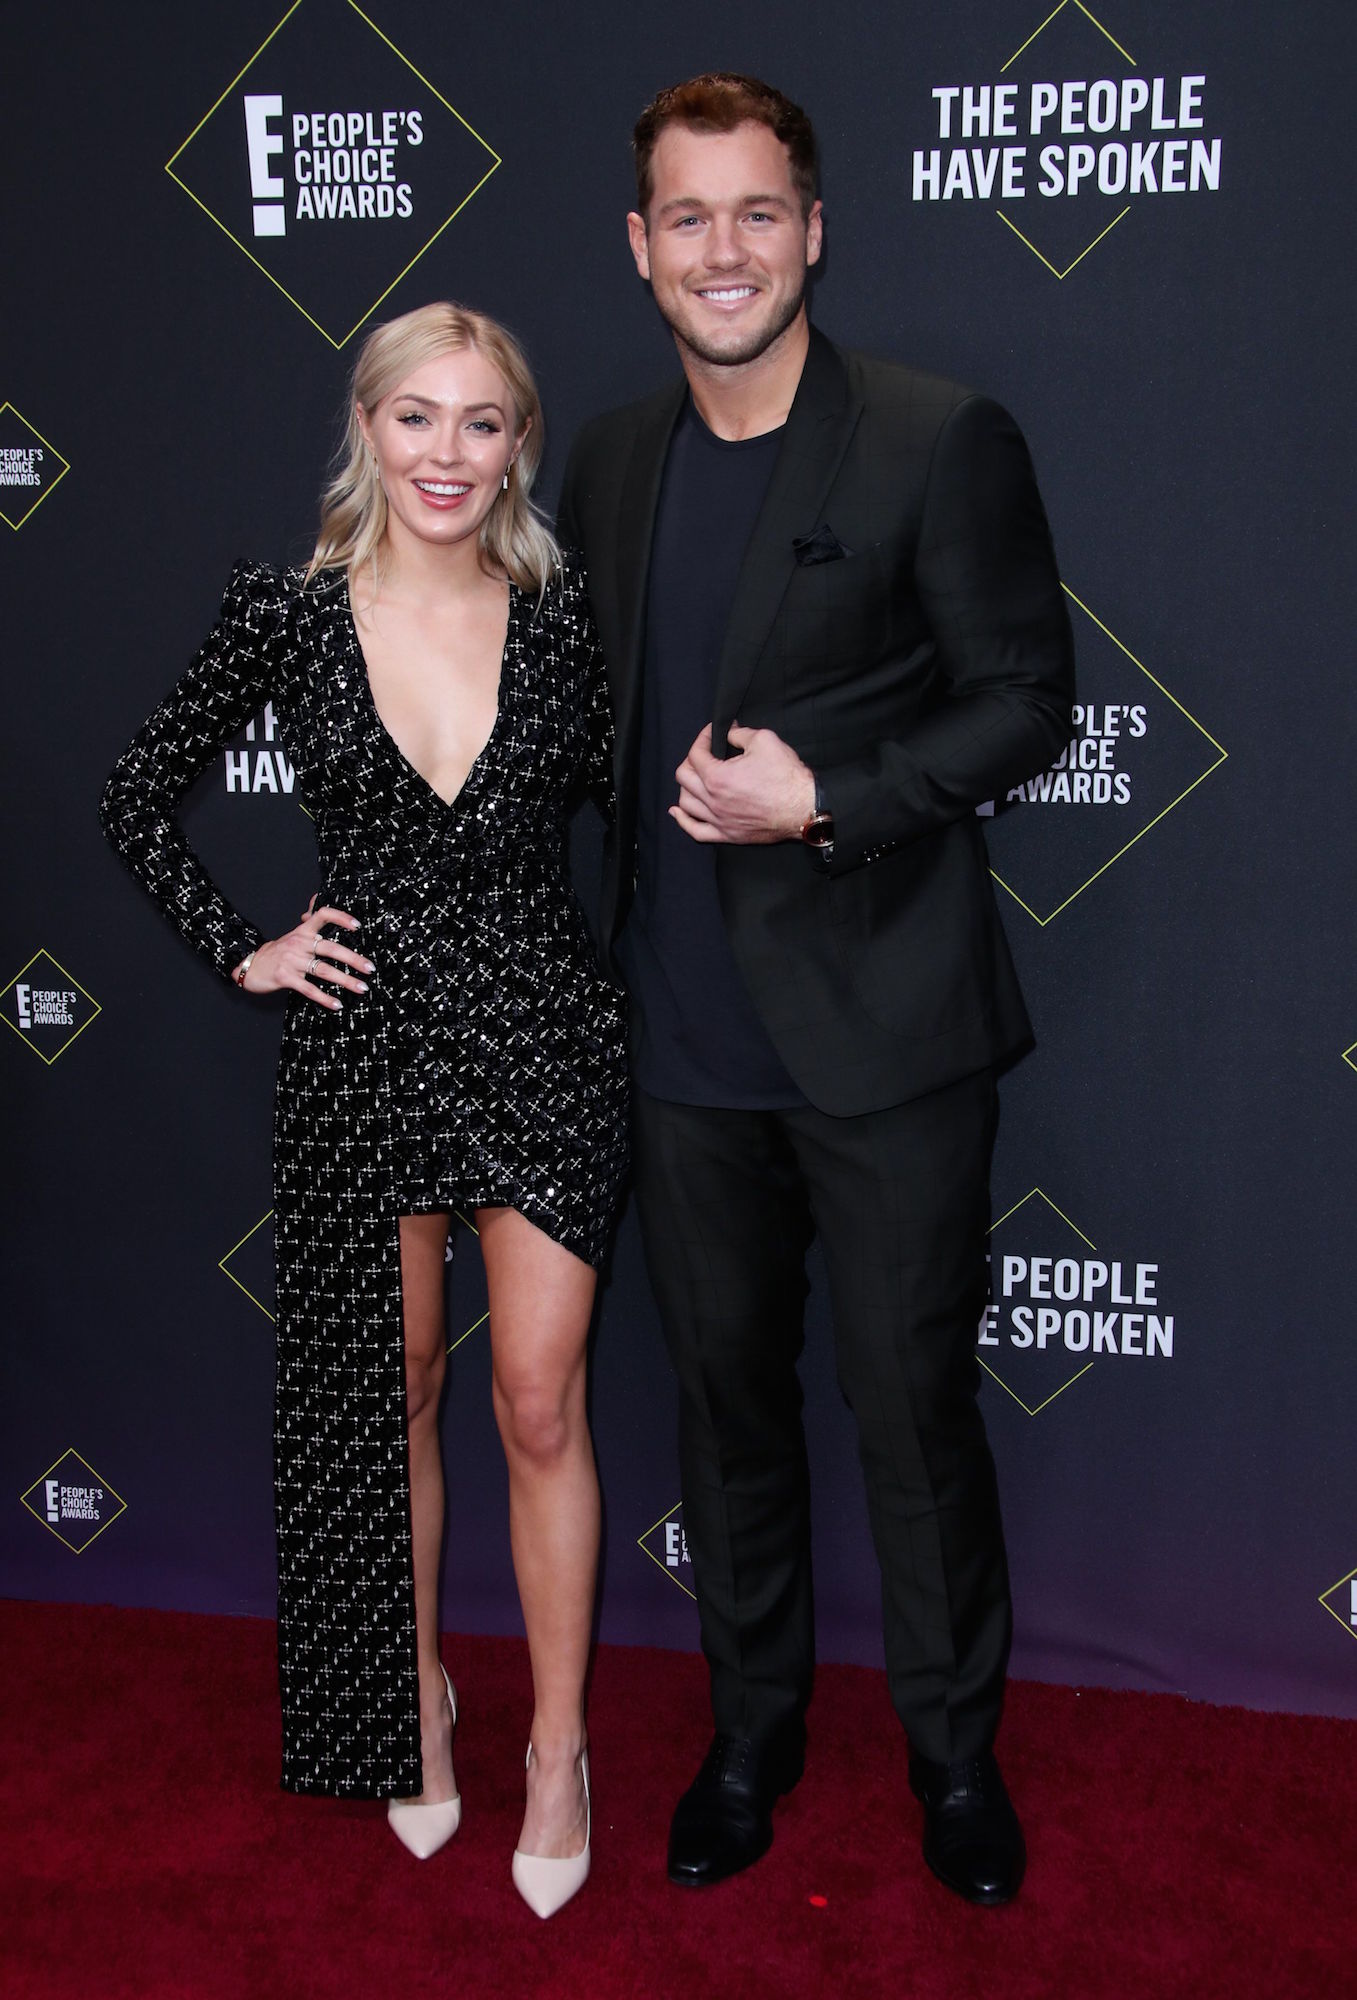 Colton Underwood on Love for Cassie Randolph After Coming Out as